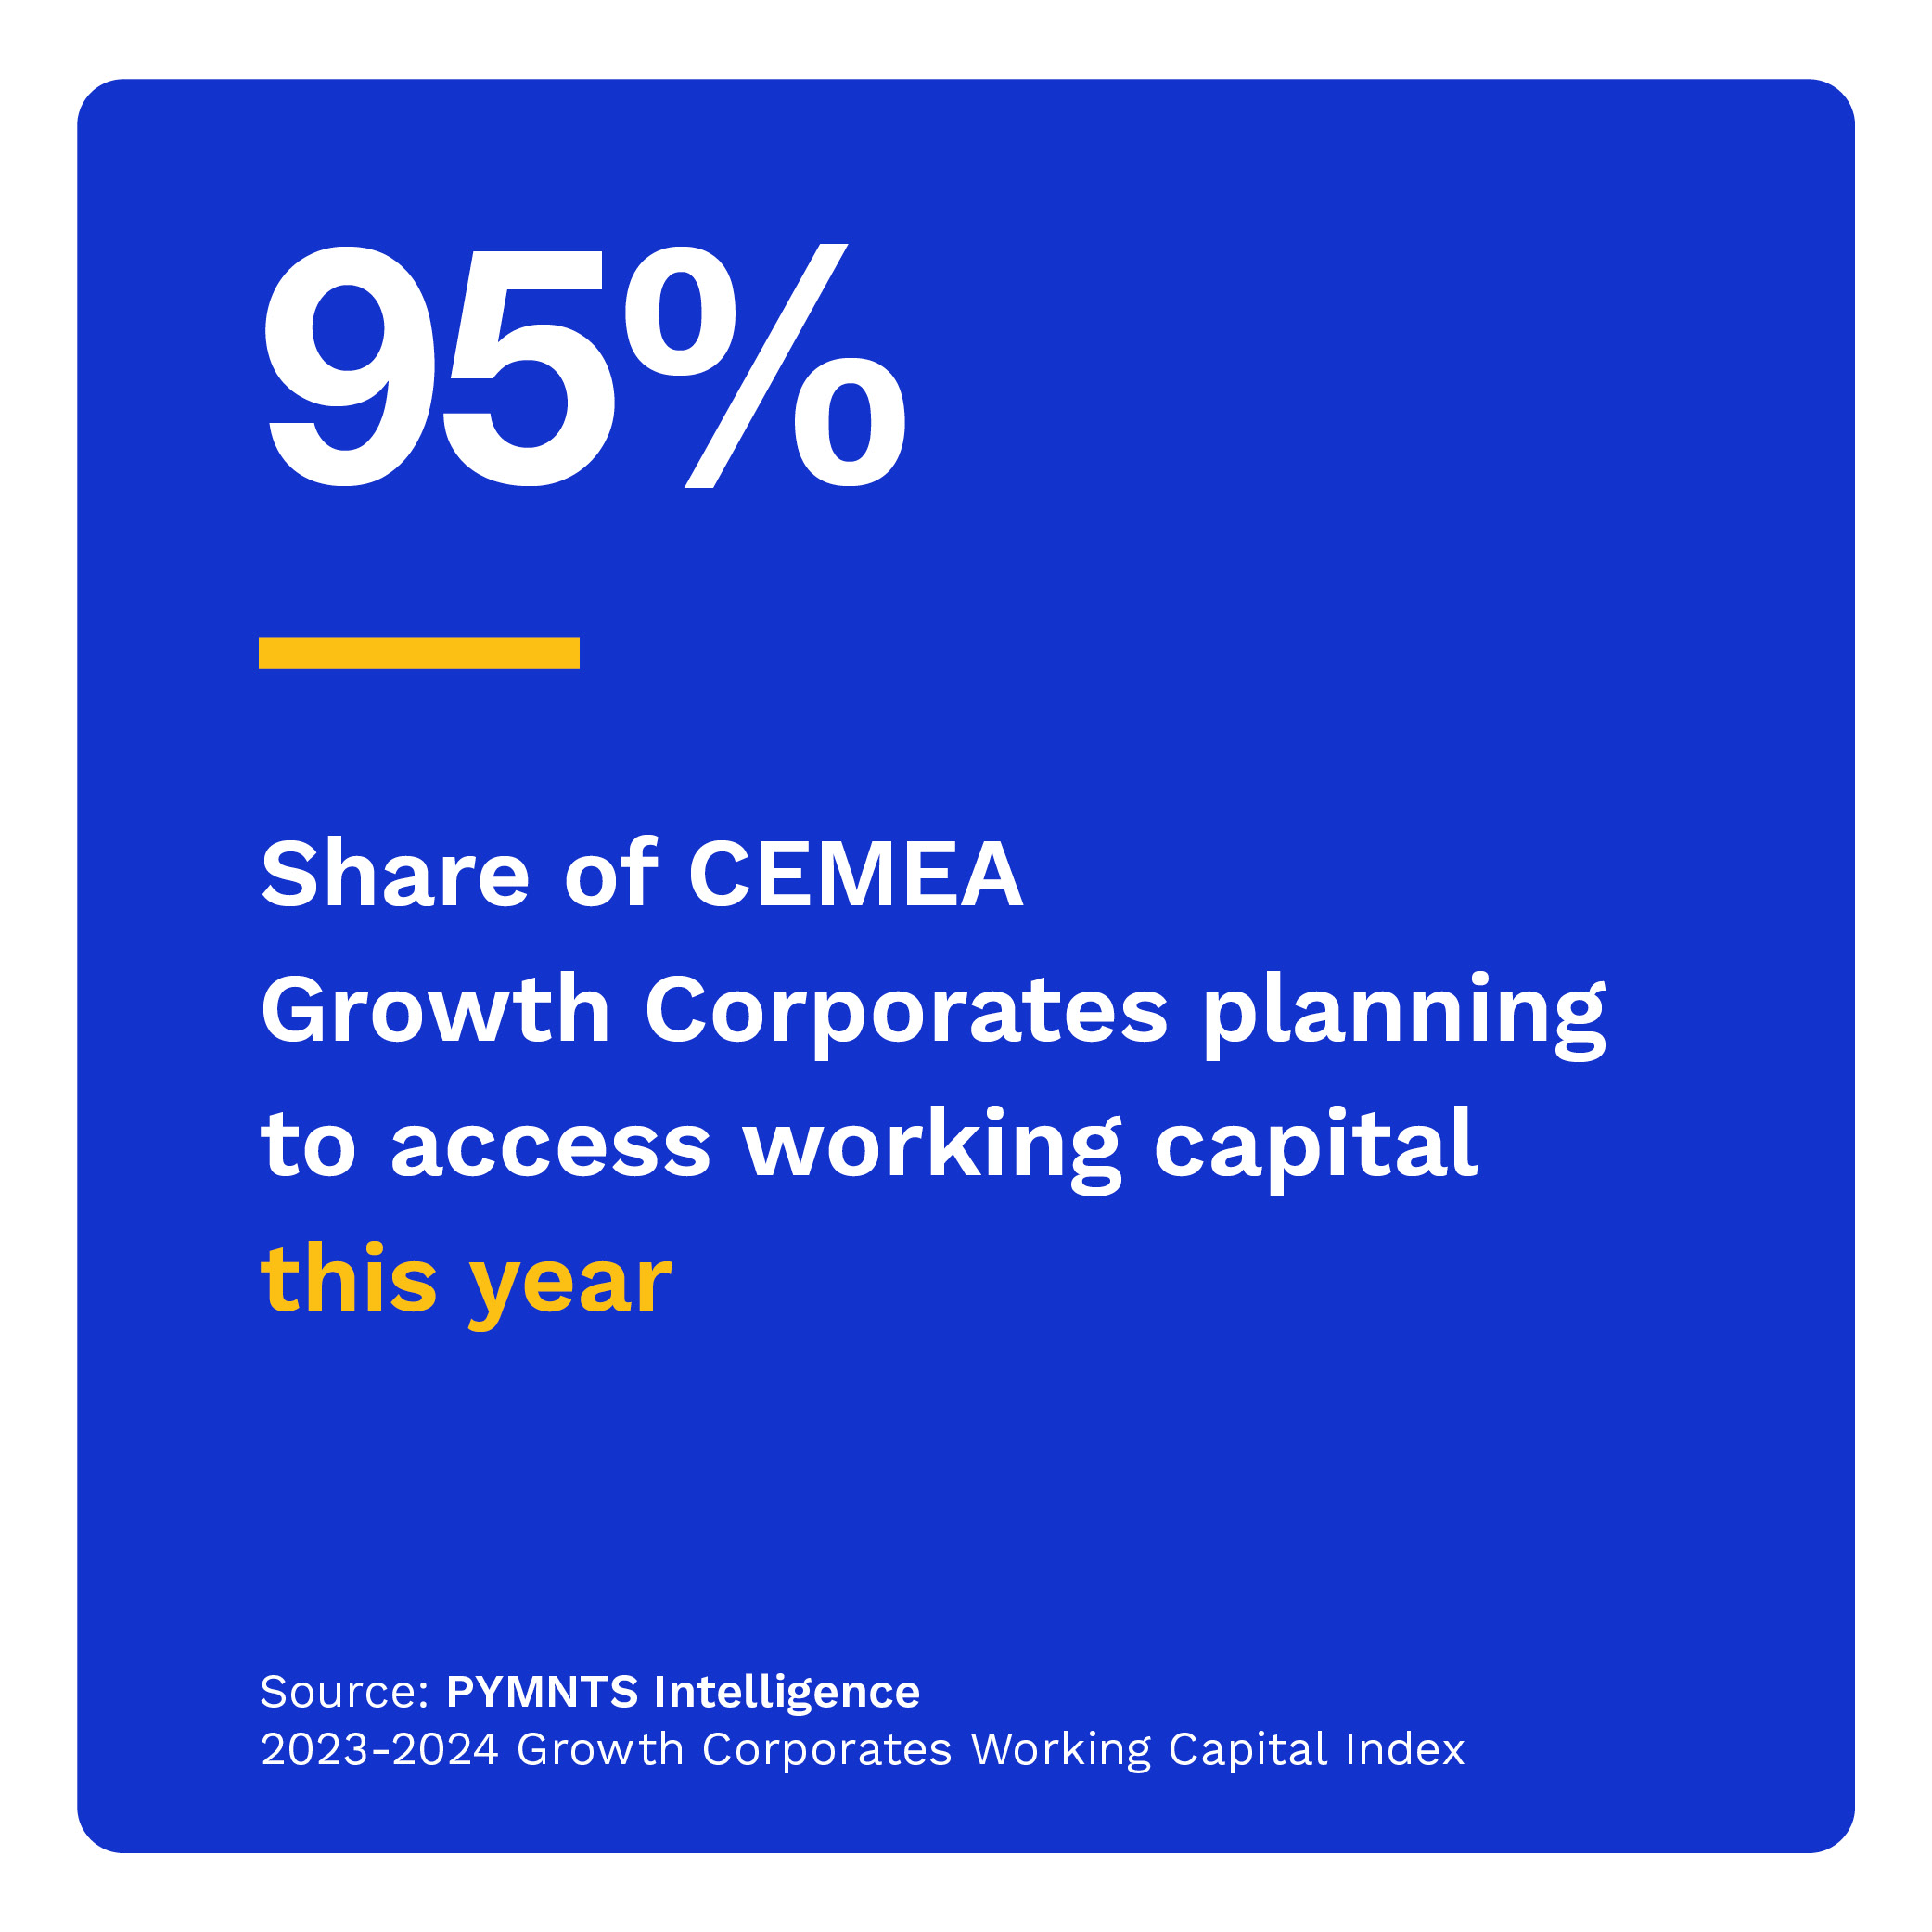  Share of CEMEA Growth Corporates planning to access working capital this year